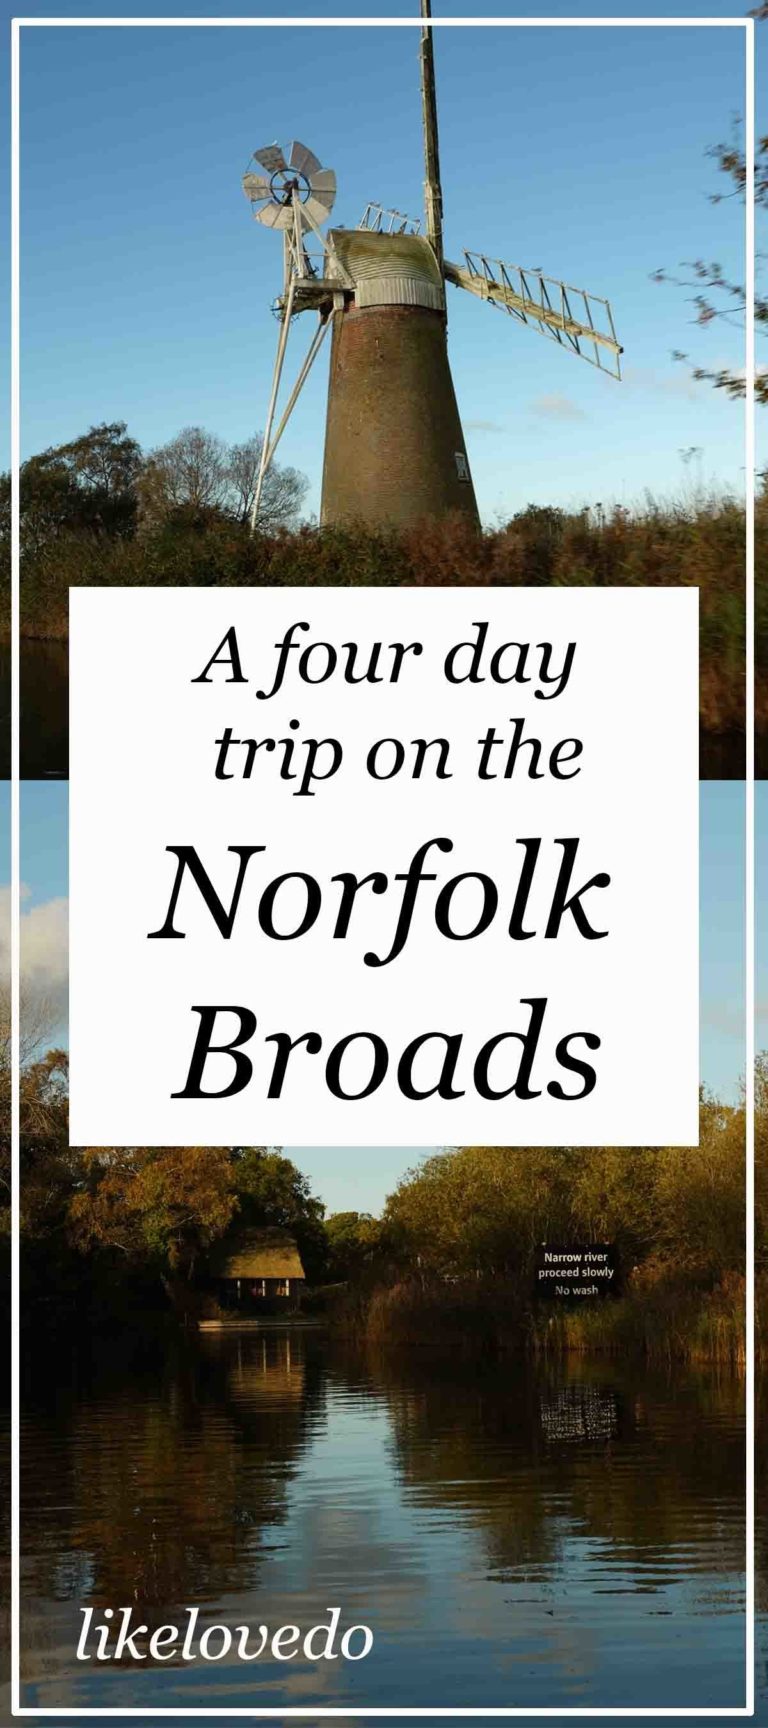 A four day trip on the Norfolk Broads